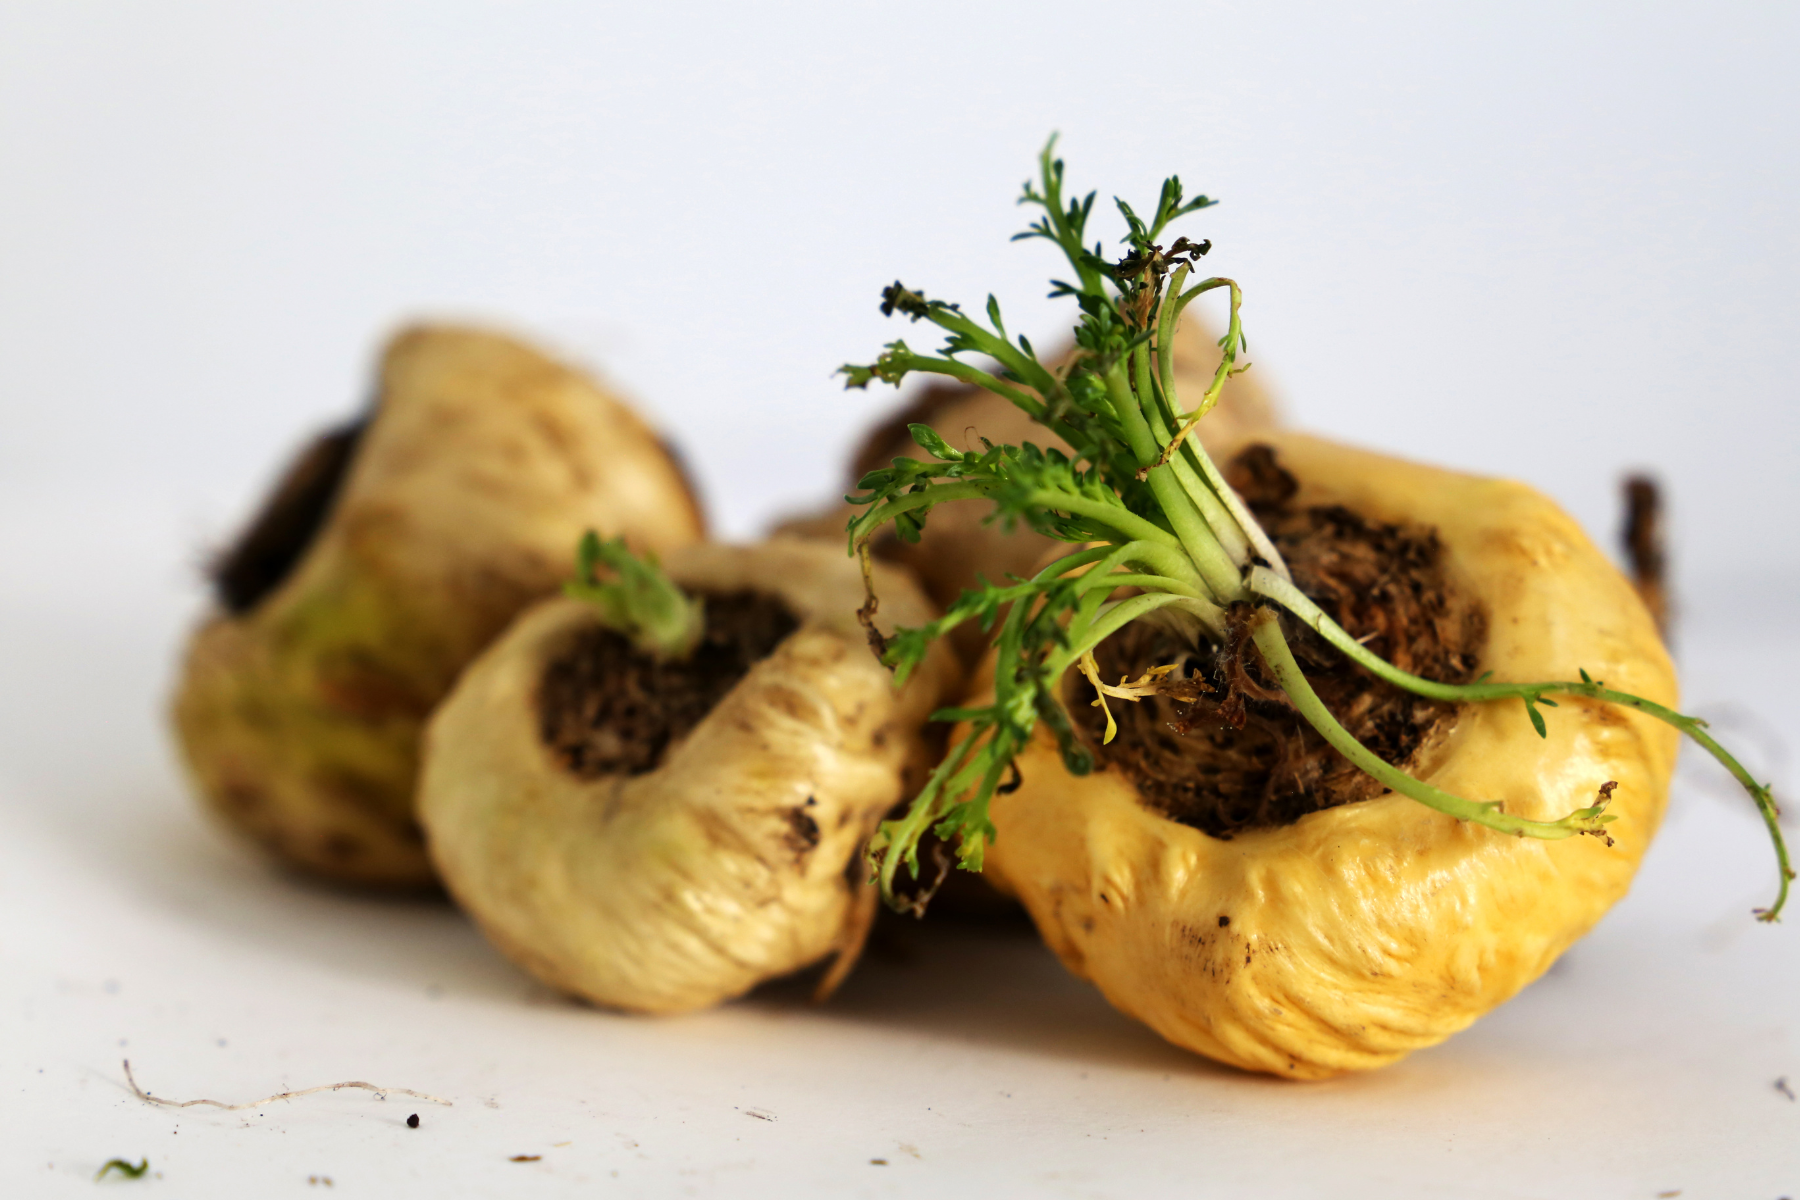 Maca root which can be beneficial for perimenopause symptoms such as hot flashes and interrupted sleep